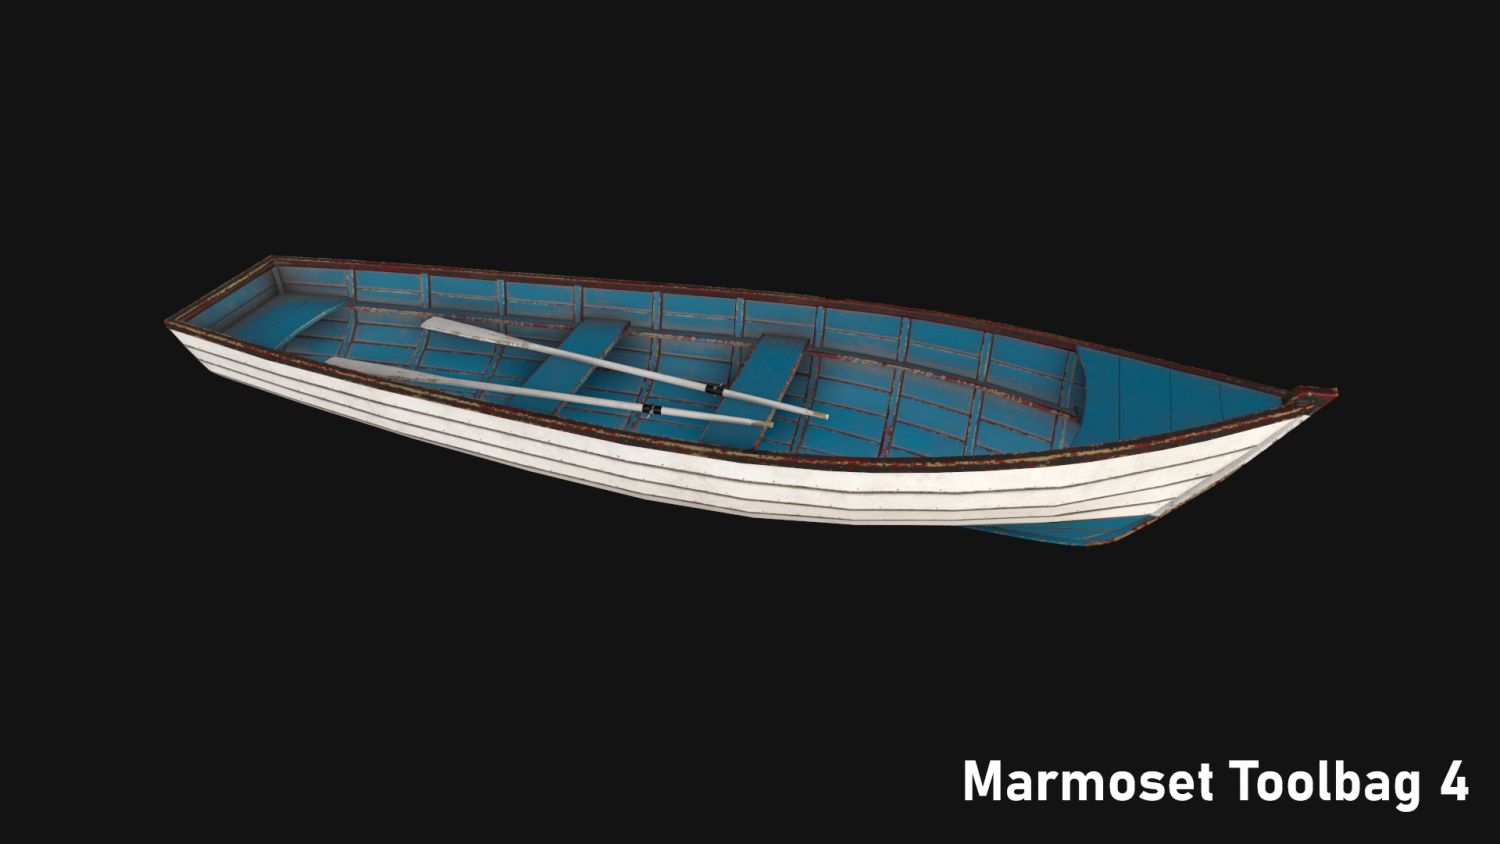 Small Wooden Boat 3d model 3ds Max files free download - modeling 47480 on  CadNav